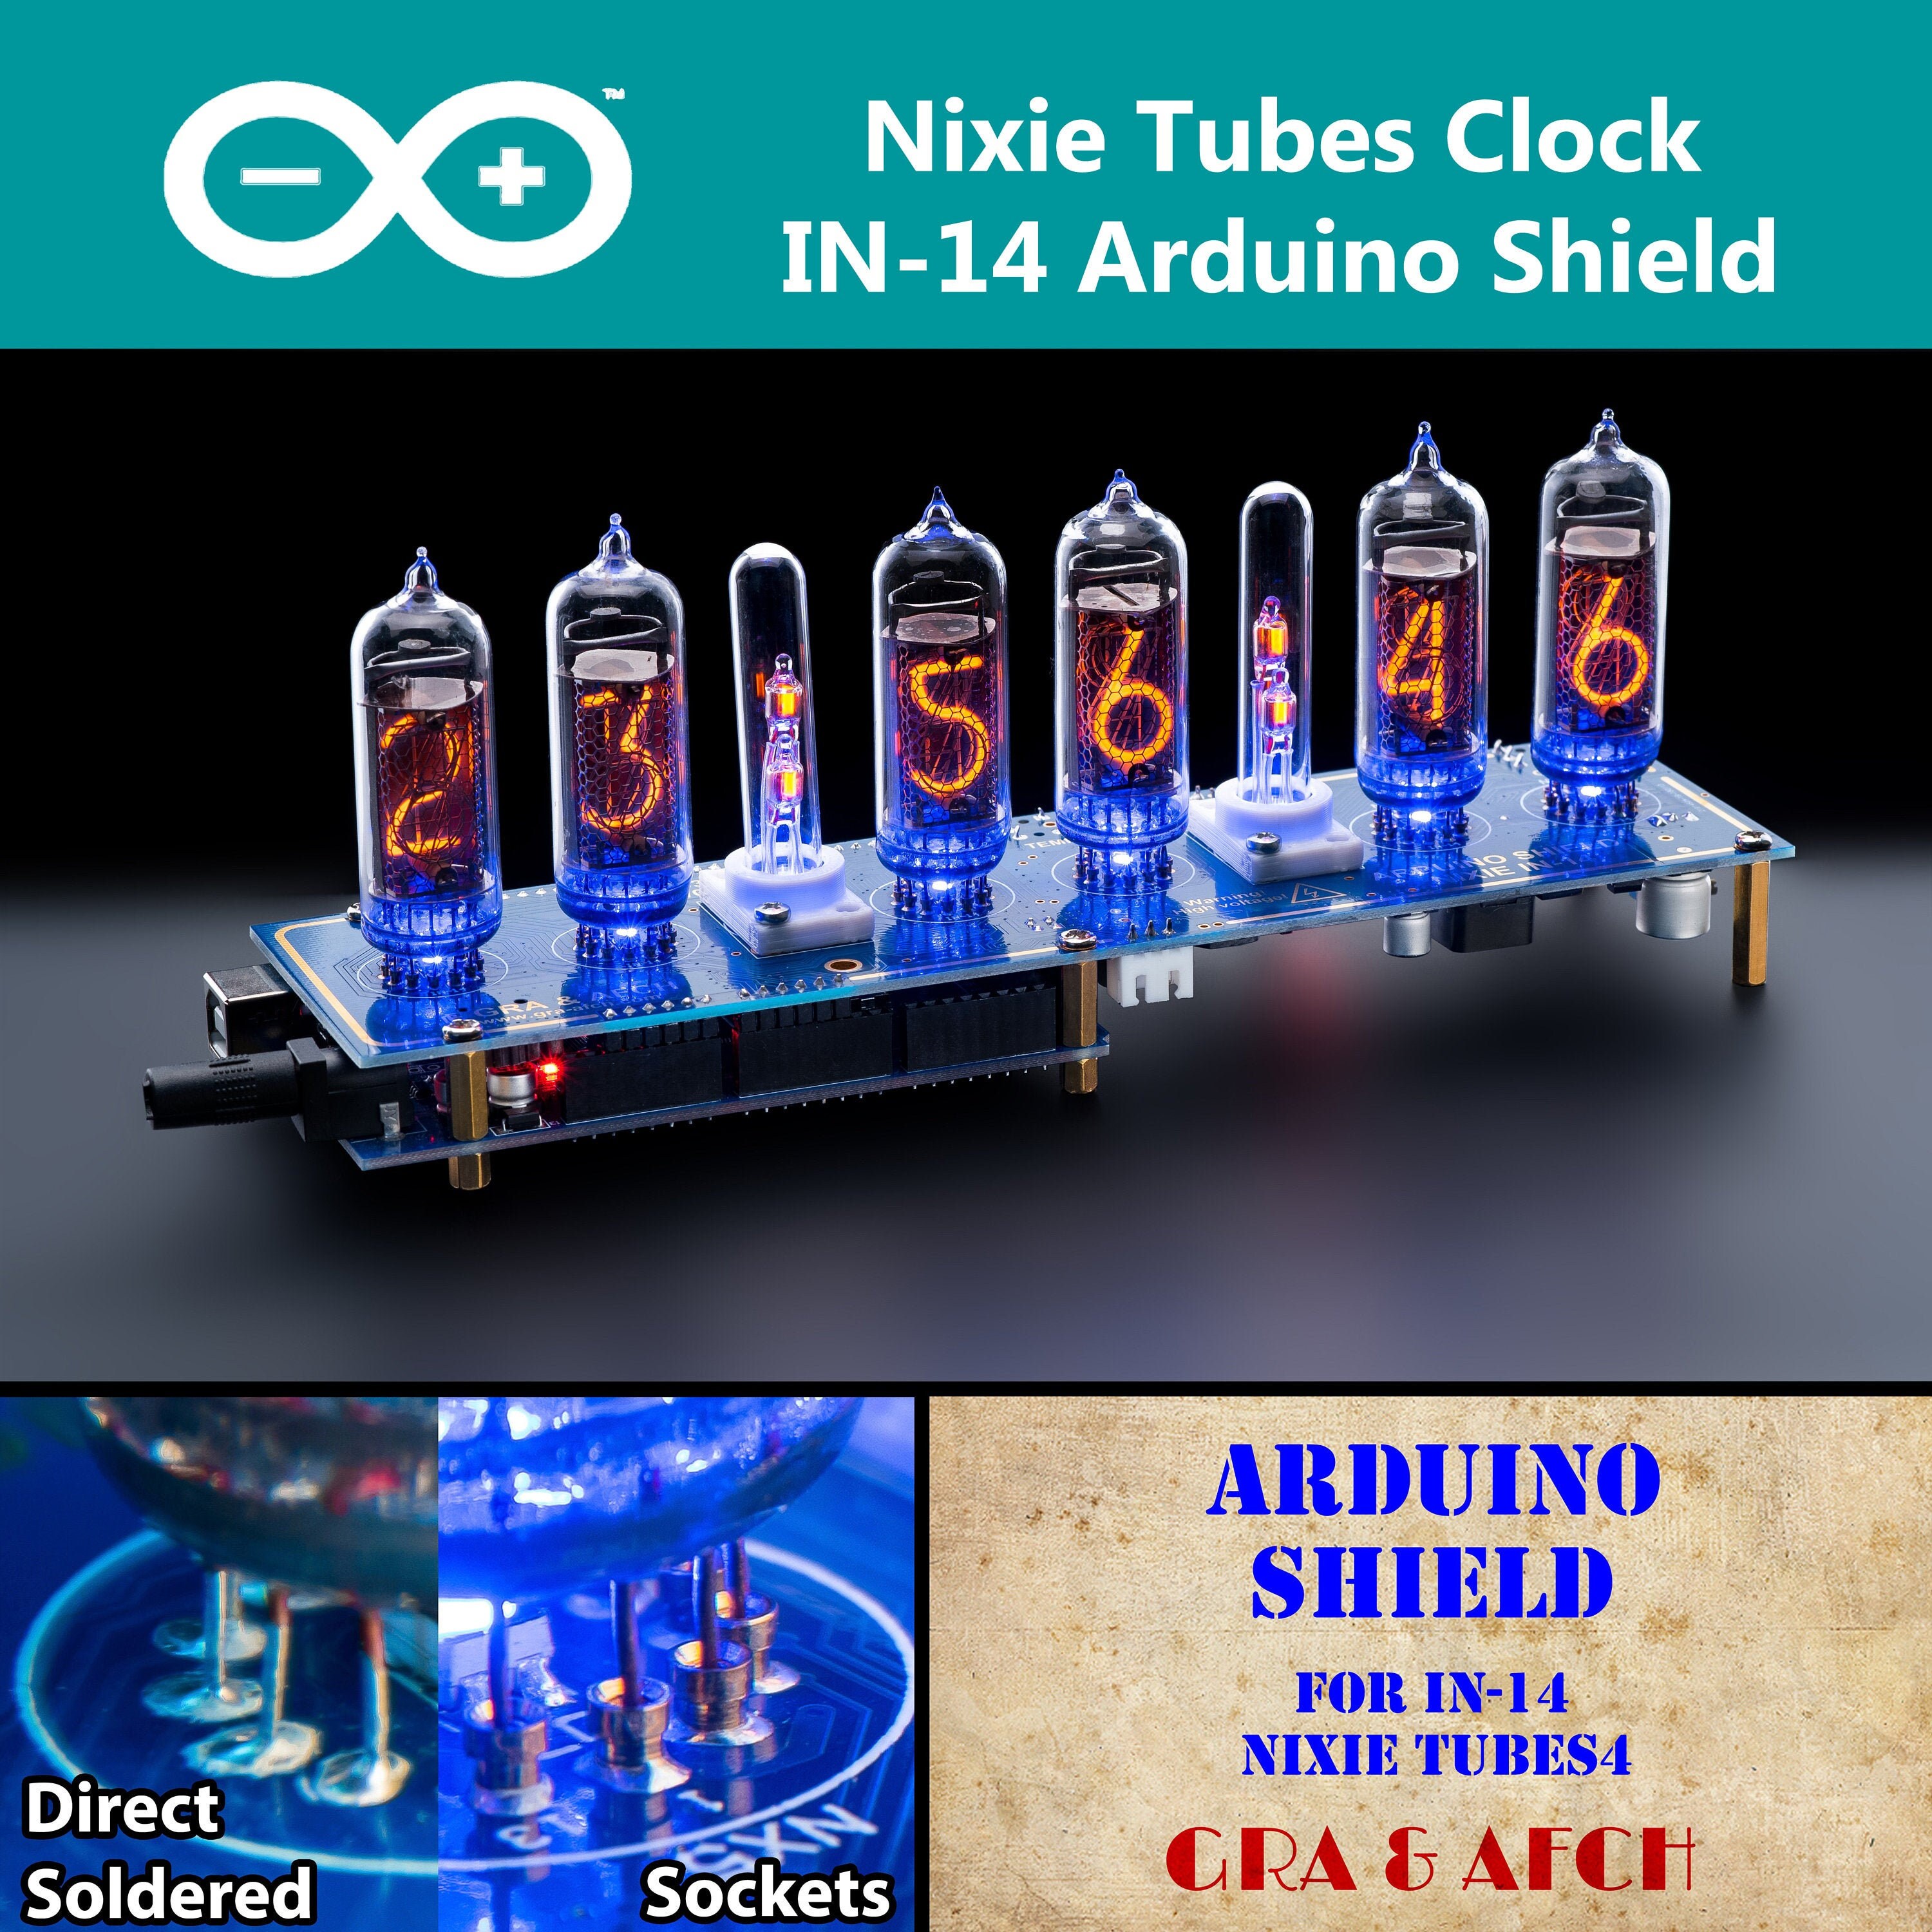 IN-14 Arduino Shield NCS314 Nixie Tubes Clock with Sockets FAST DELIVERY 3-5Days 